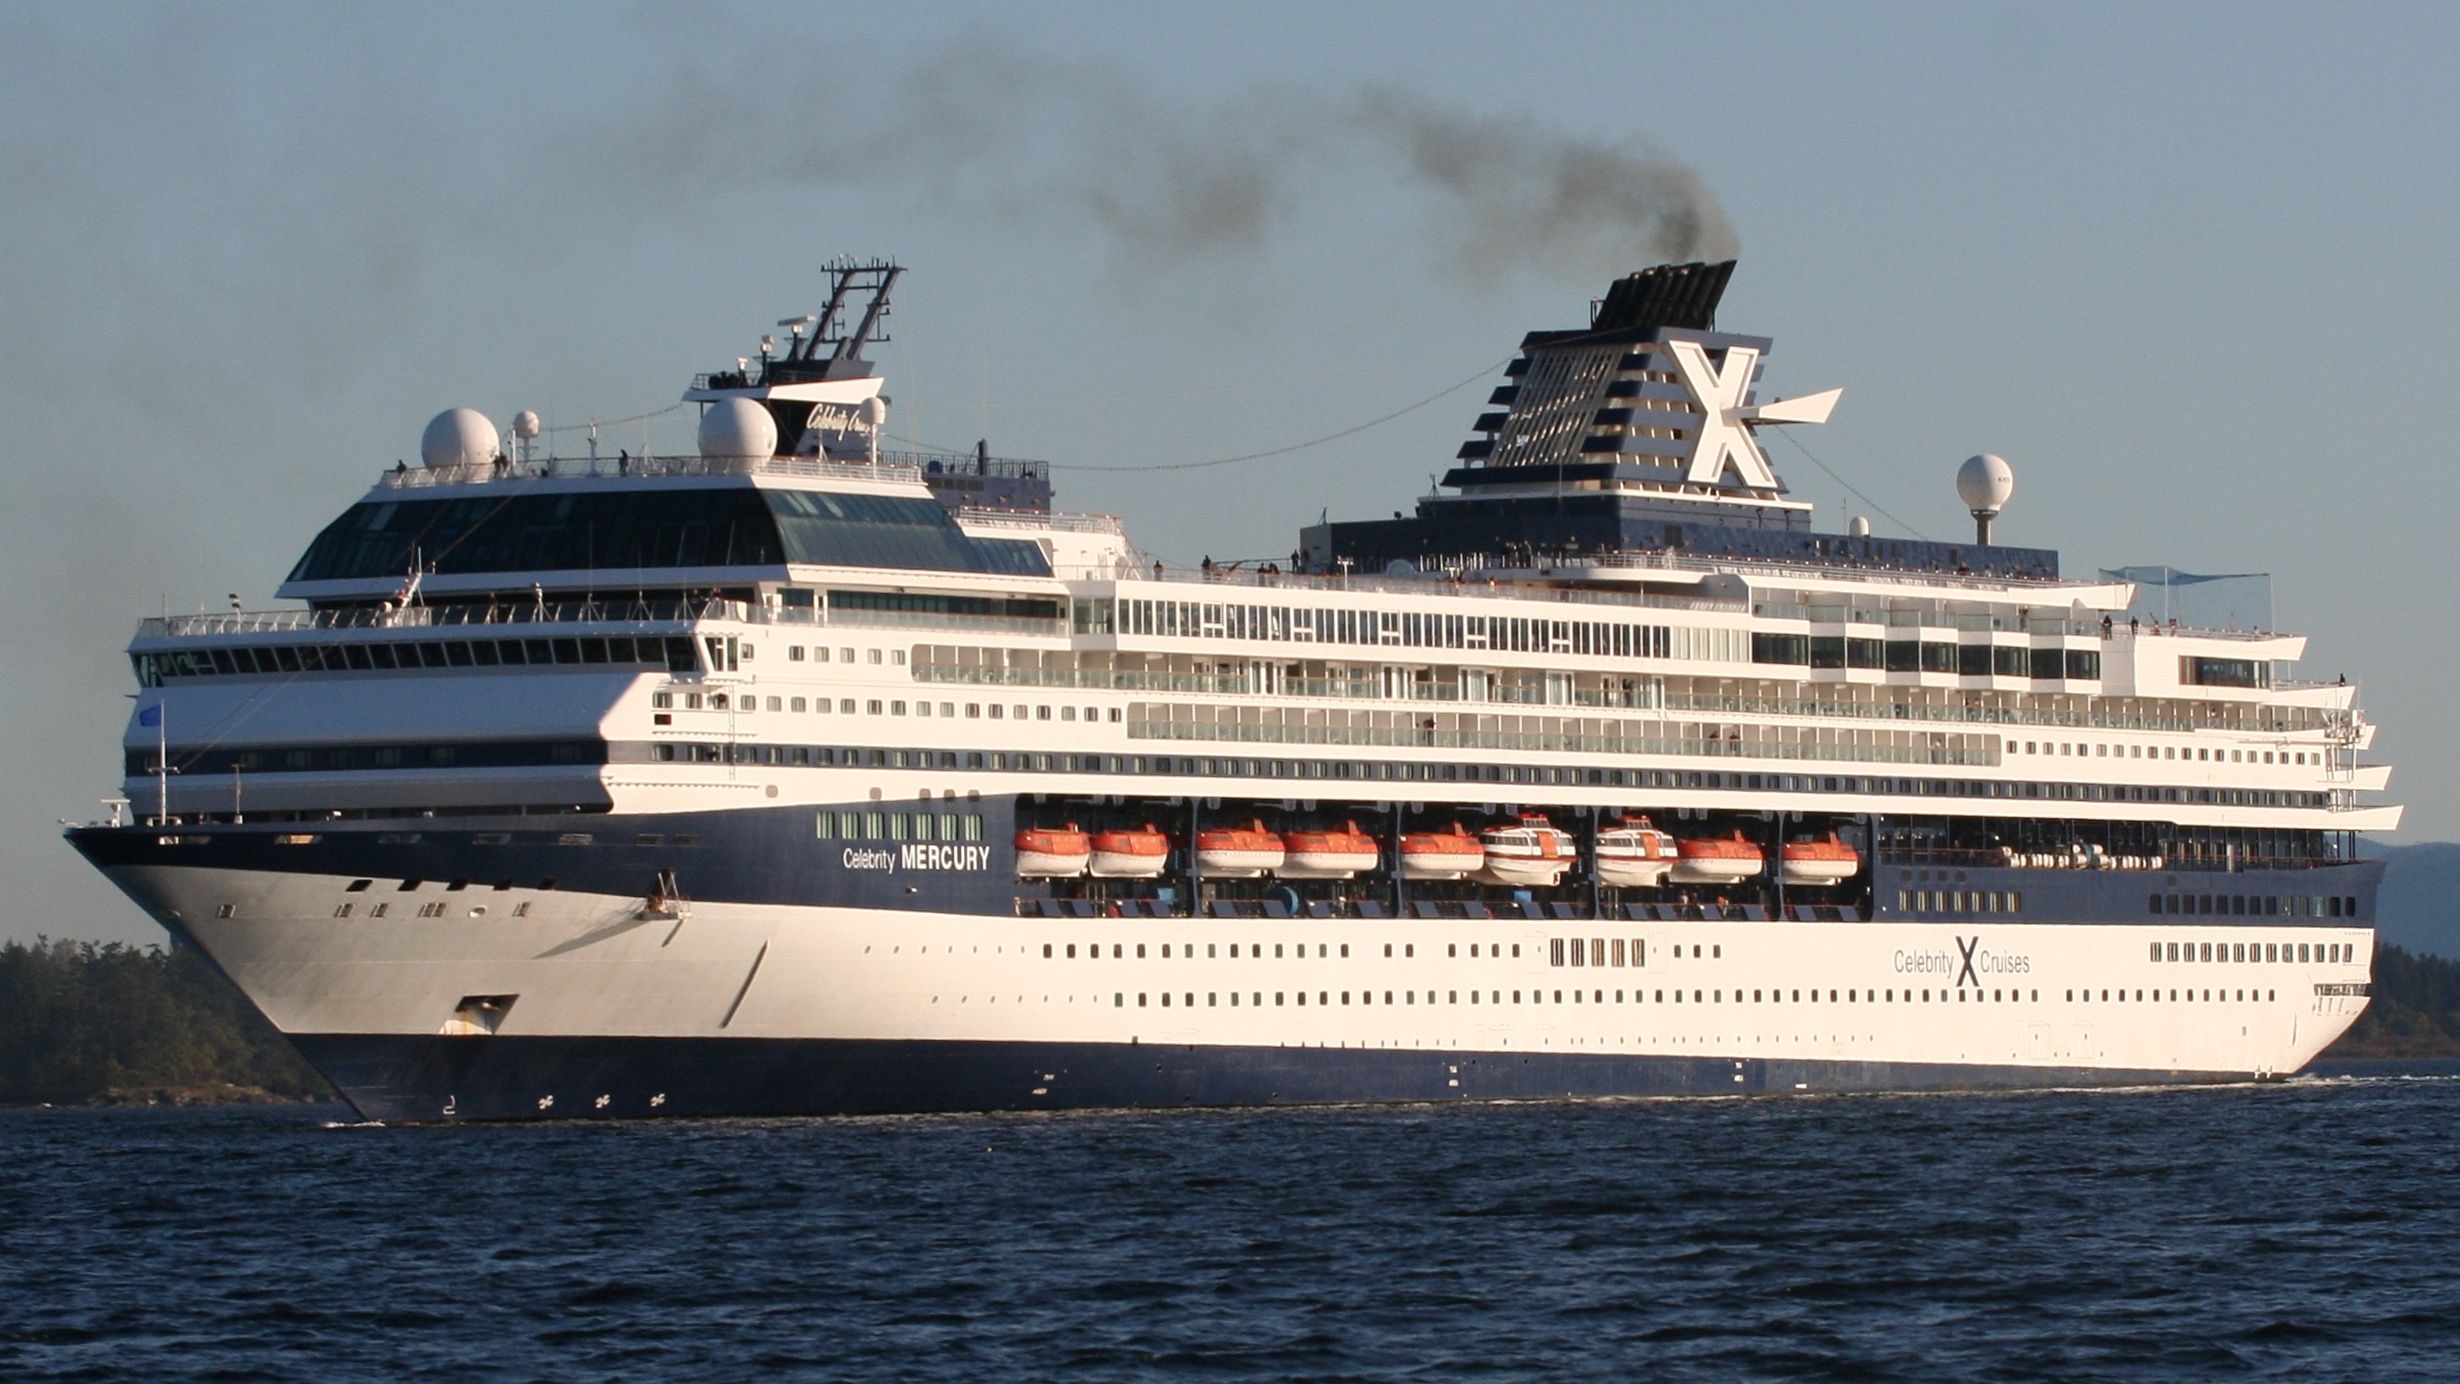 <p>Owned by Royal Caribbean Cruise Lines, the Celebrity Mercury experienced a sudden illness in 2010 that affected 413 passengers.</p>